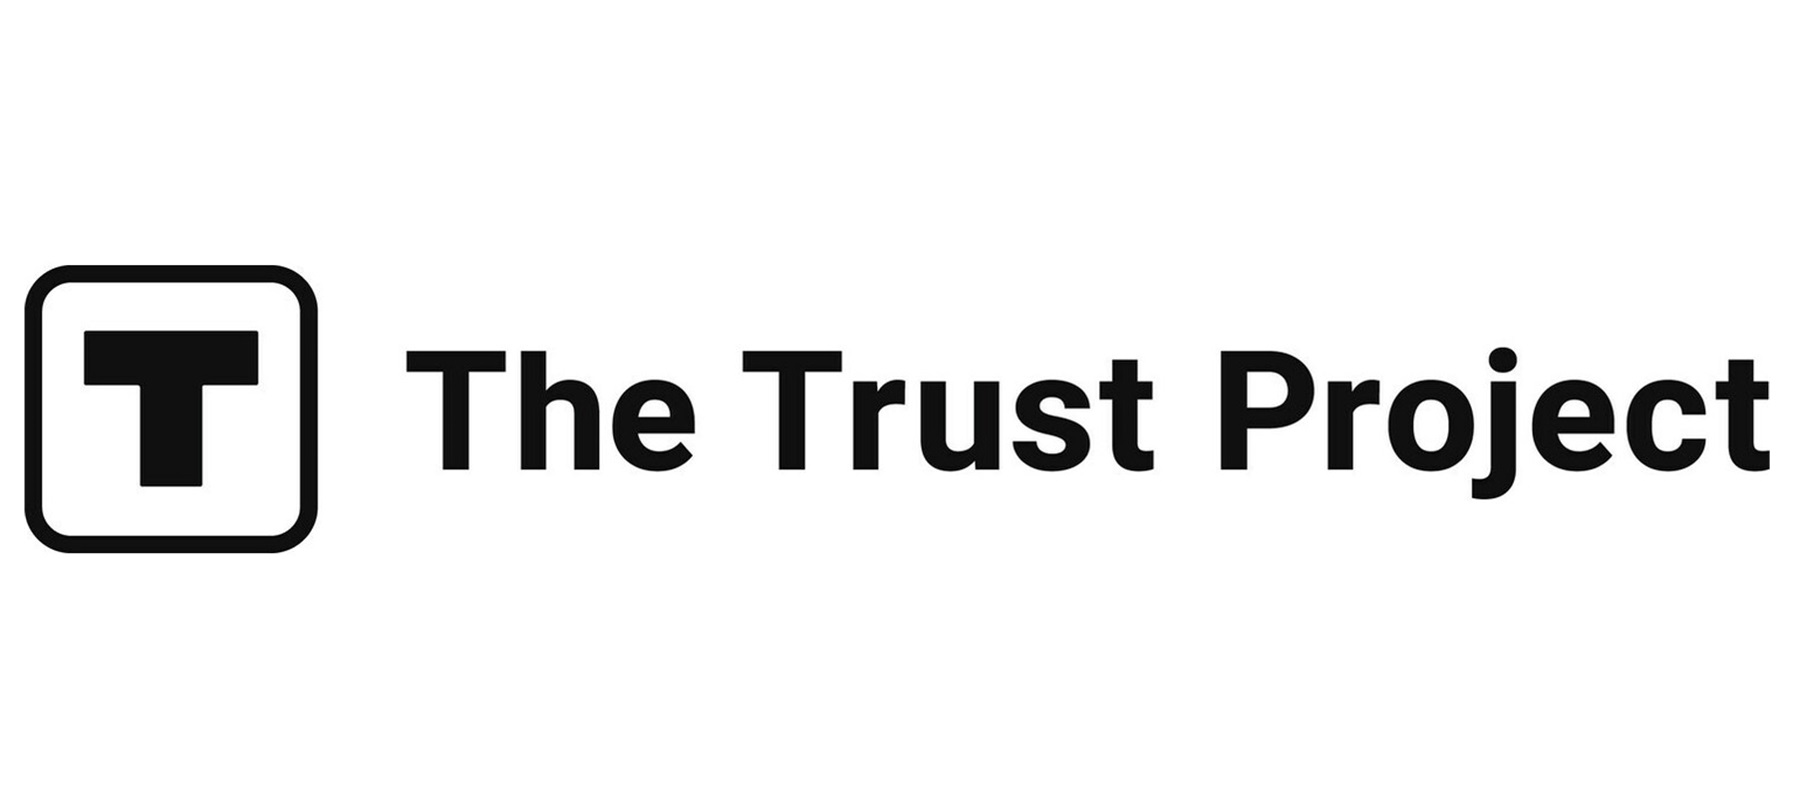 Global news organizations network The Trust Project unveils ad campaign to fight disinformation